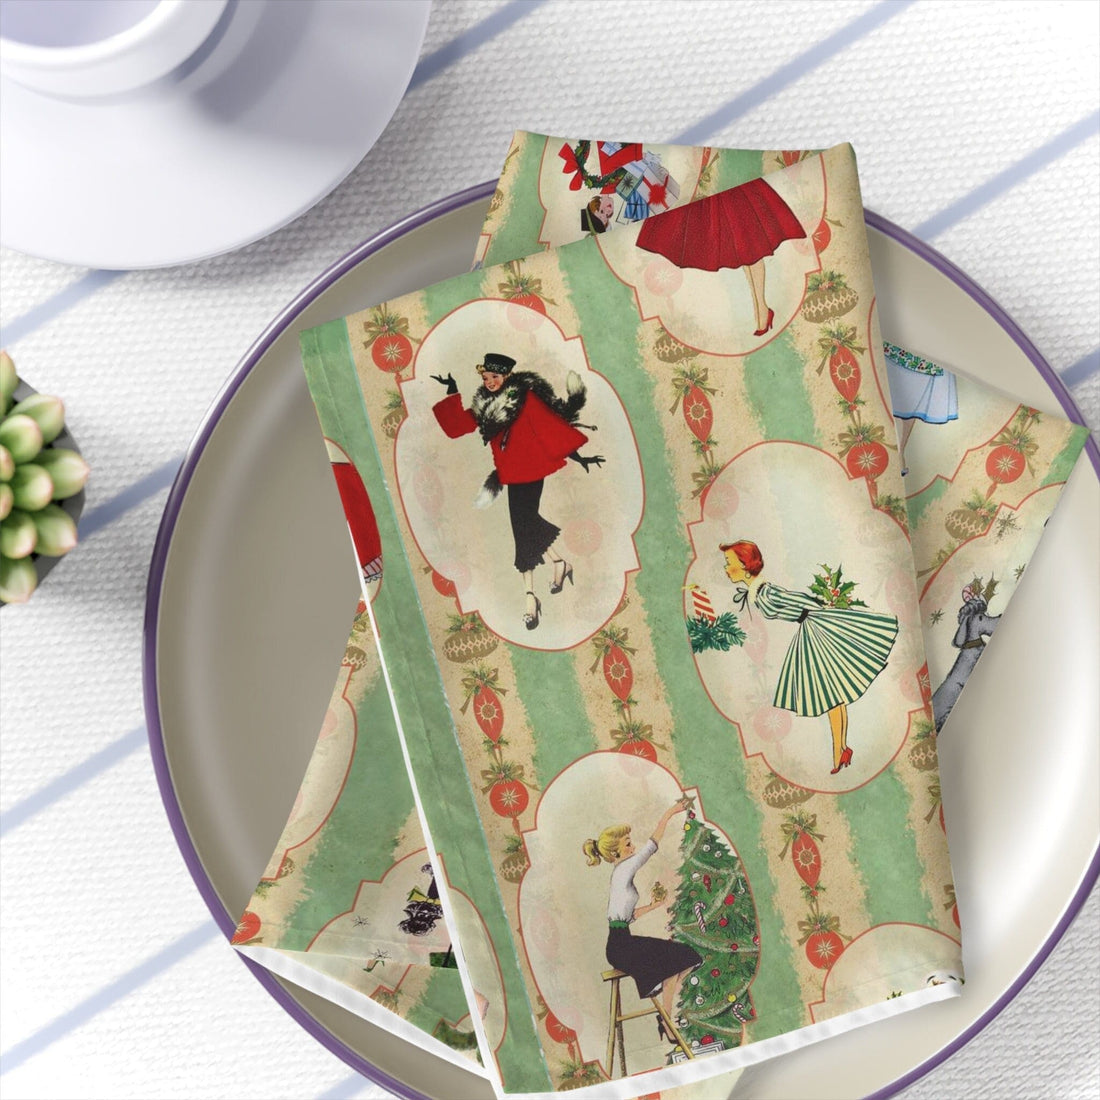 Kate McEnroe New York Set of 4 Vintage 1950s Christmas Napkins, Mid Century Modern Retro Green, Red, Women, Ladies, Housewives Holiday Table Linens - 122681223Napkins29690093392553166920